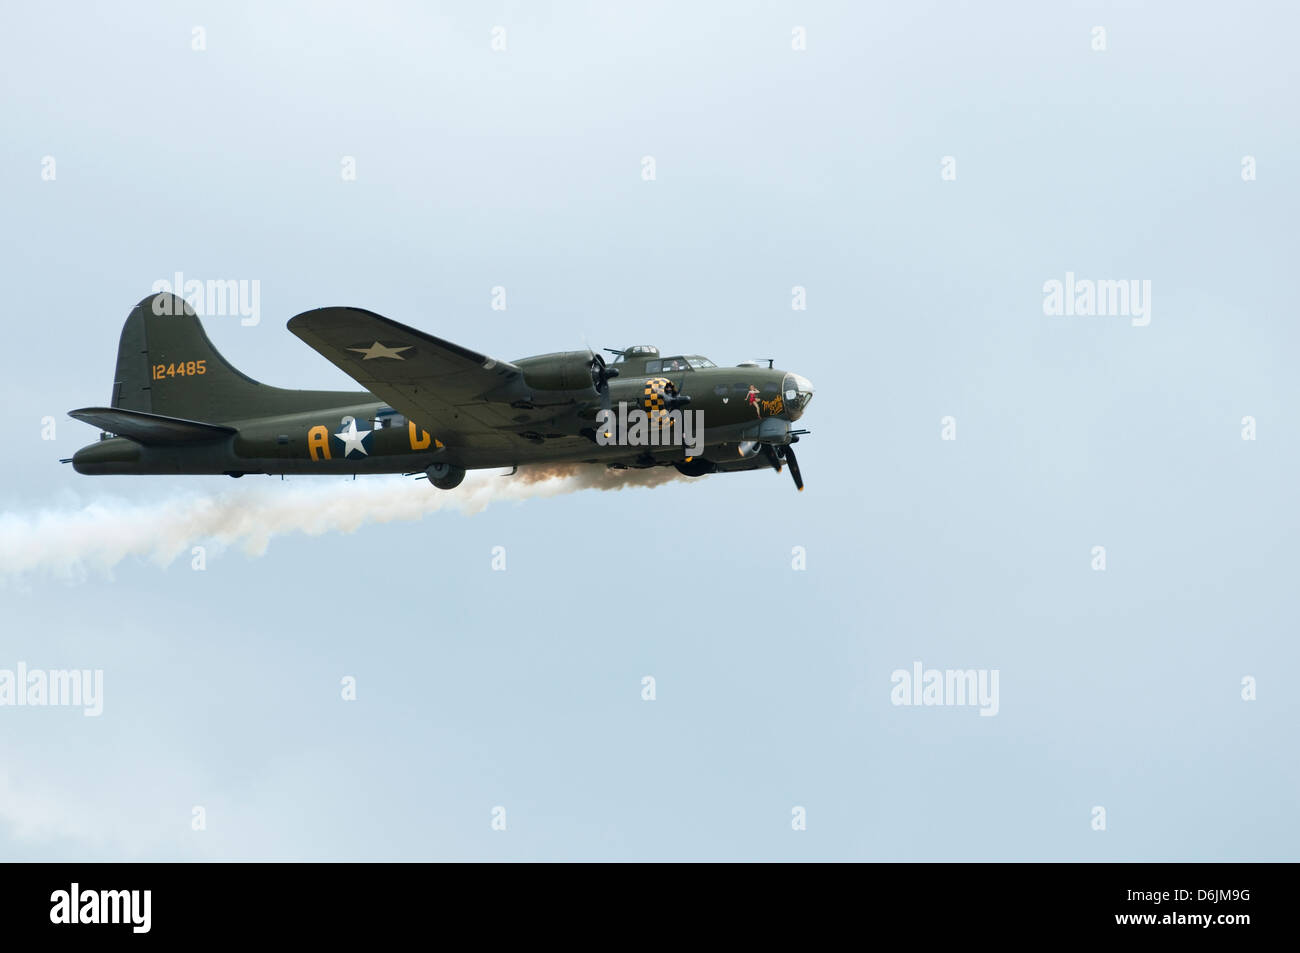 A World war two USAF B17 aircraft performs a fly past trailing smoke, isolated against a grey sky. Stock Photo